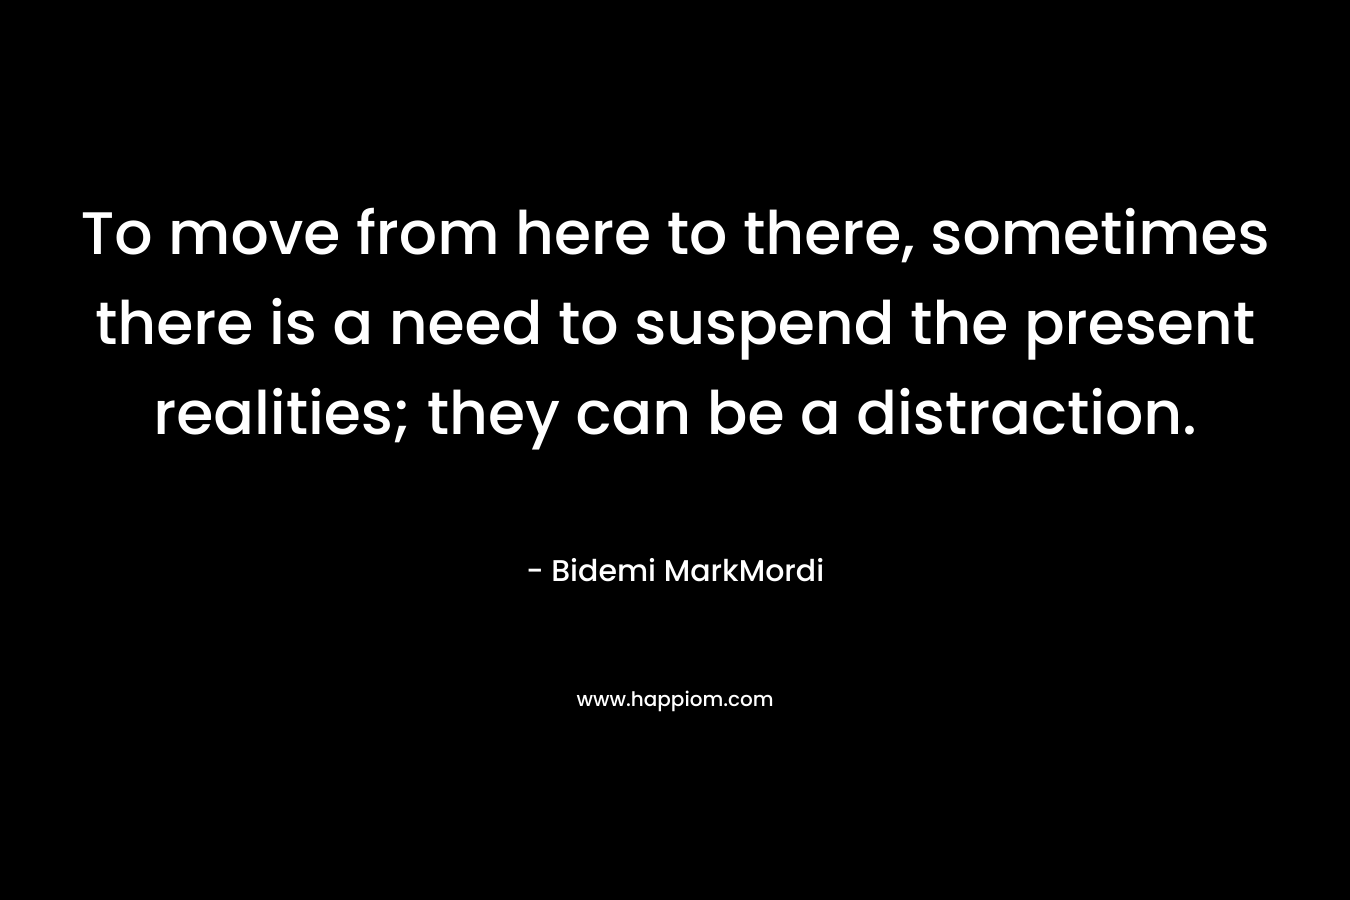 To move from here to there, sometimes there is a need to suspend the present realities; they can be a distraction. – Bidemi MarkMordi